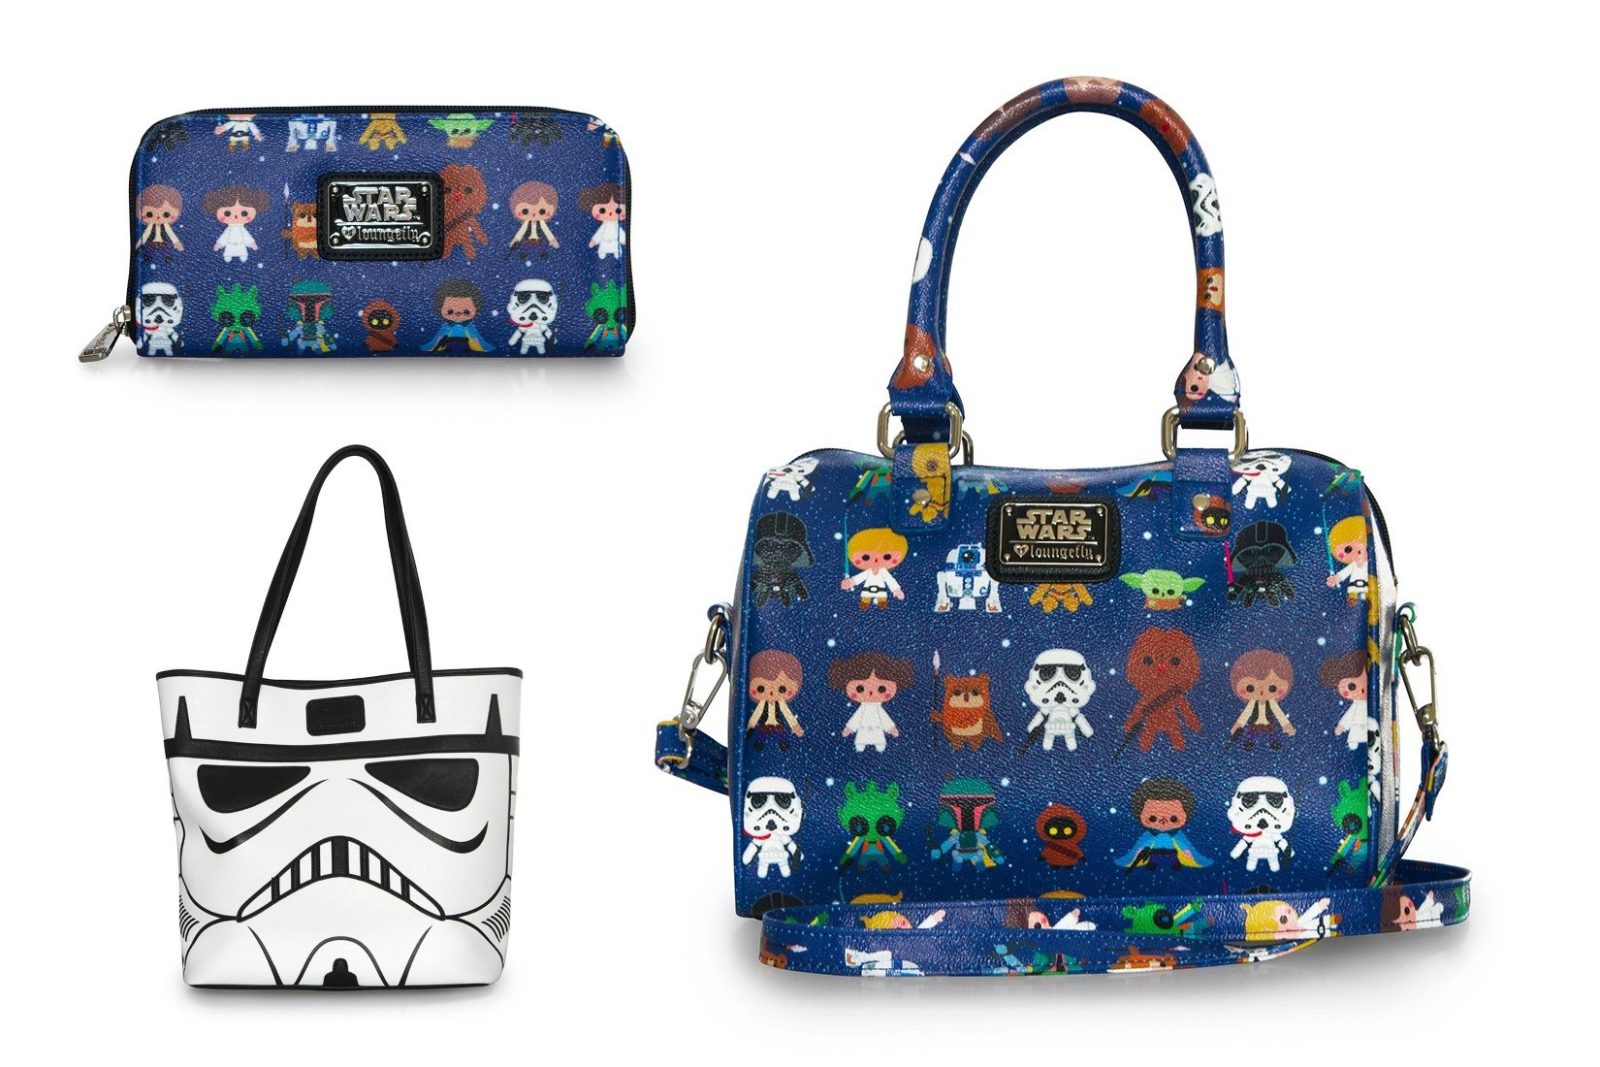 New Loungefly x Star Wars bags and wallets